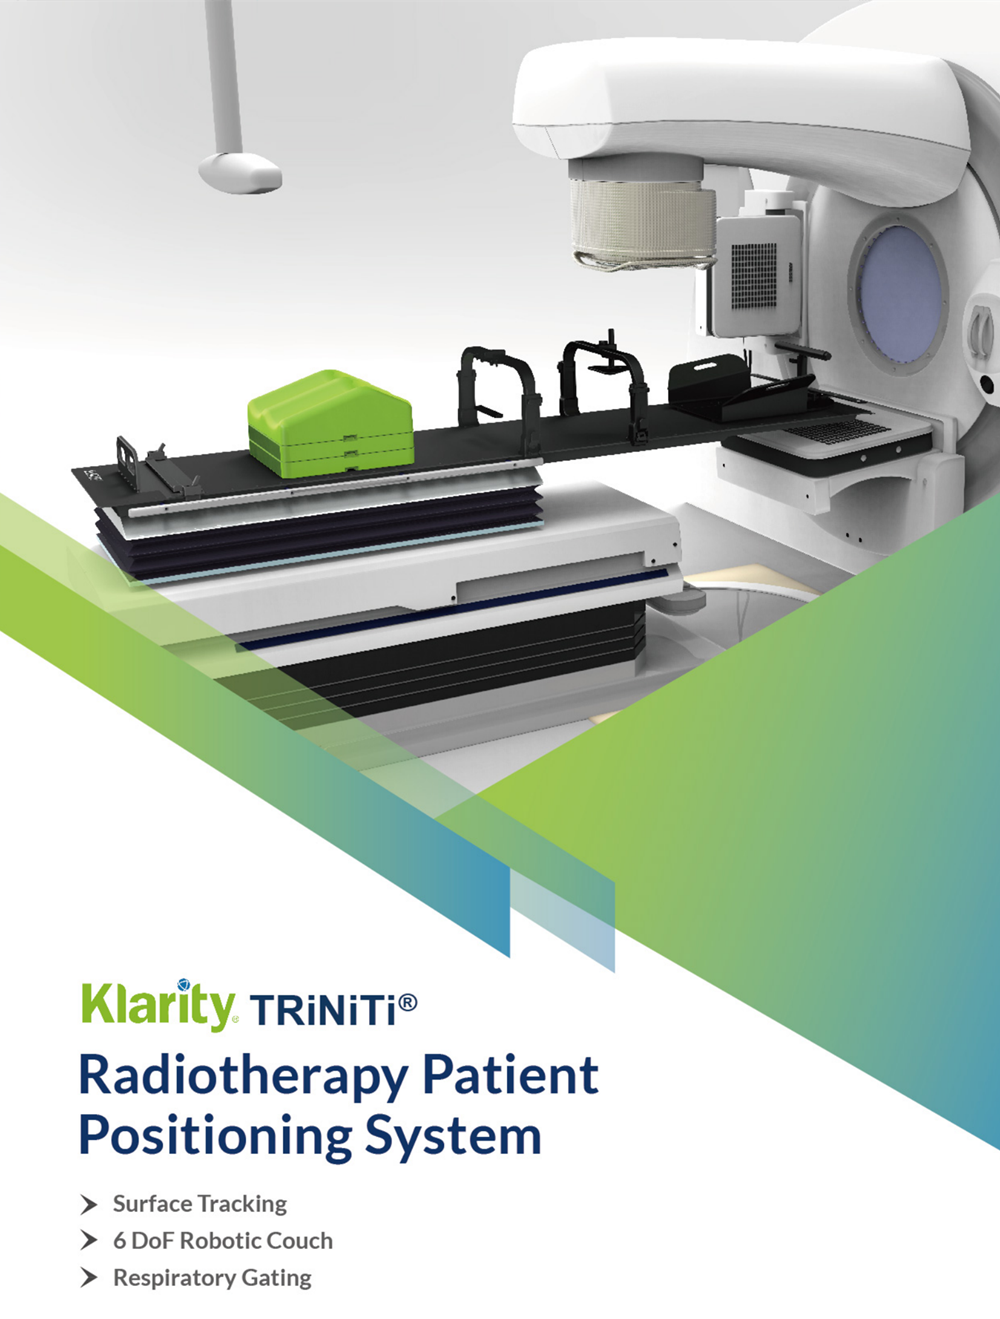 Klarity TRINITI Radiotherapy Patient Positioning System 20210326_00_副本.png